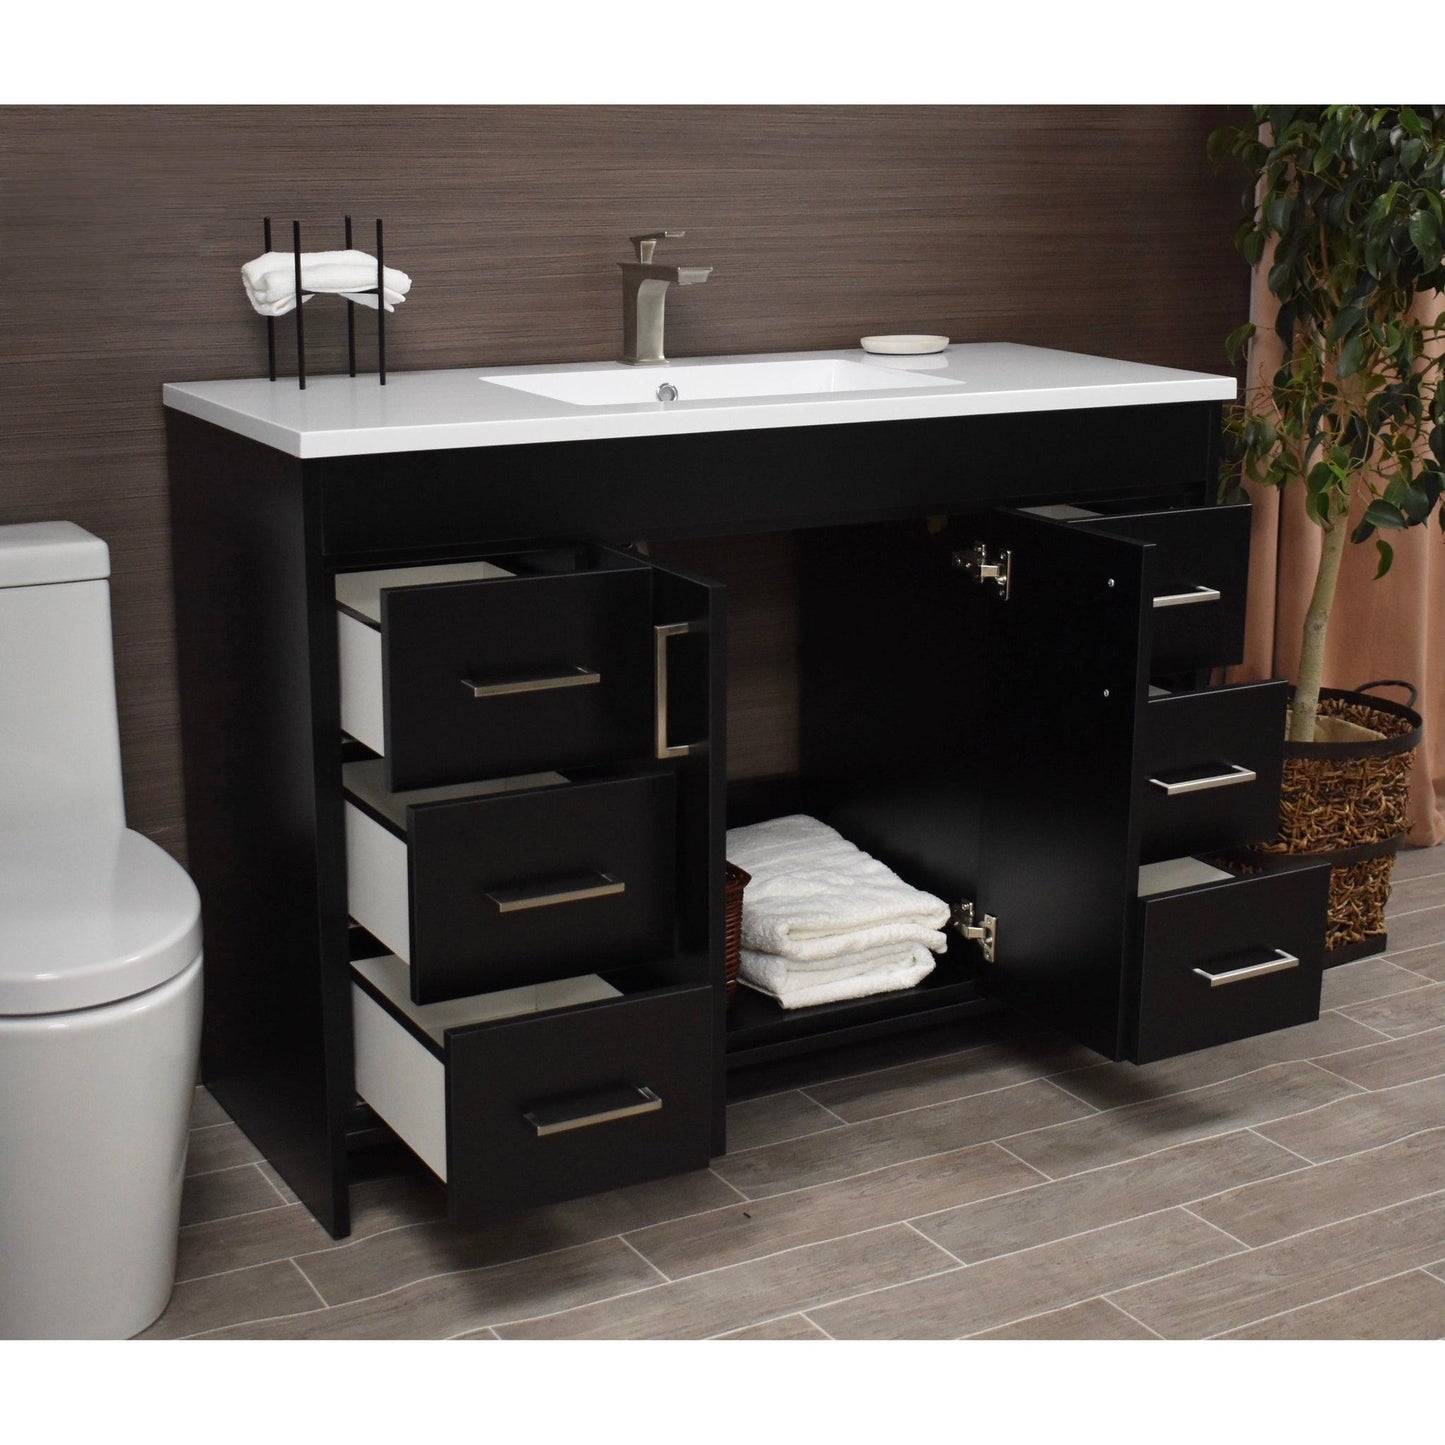 Volpa USA Rio 48" Black Freestanding Modern Bathroom Vanity With Integrated Acrylic Top and Brushed Nickel Handles